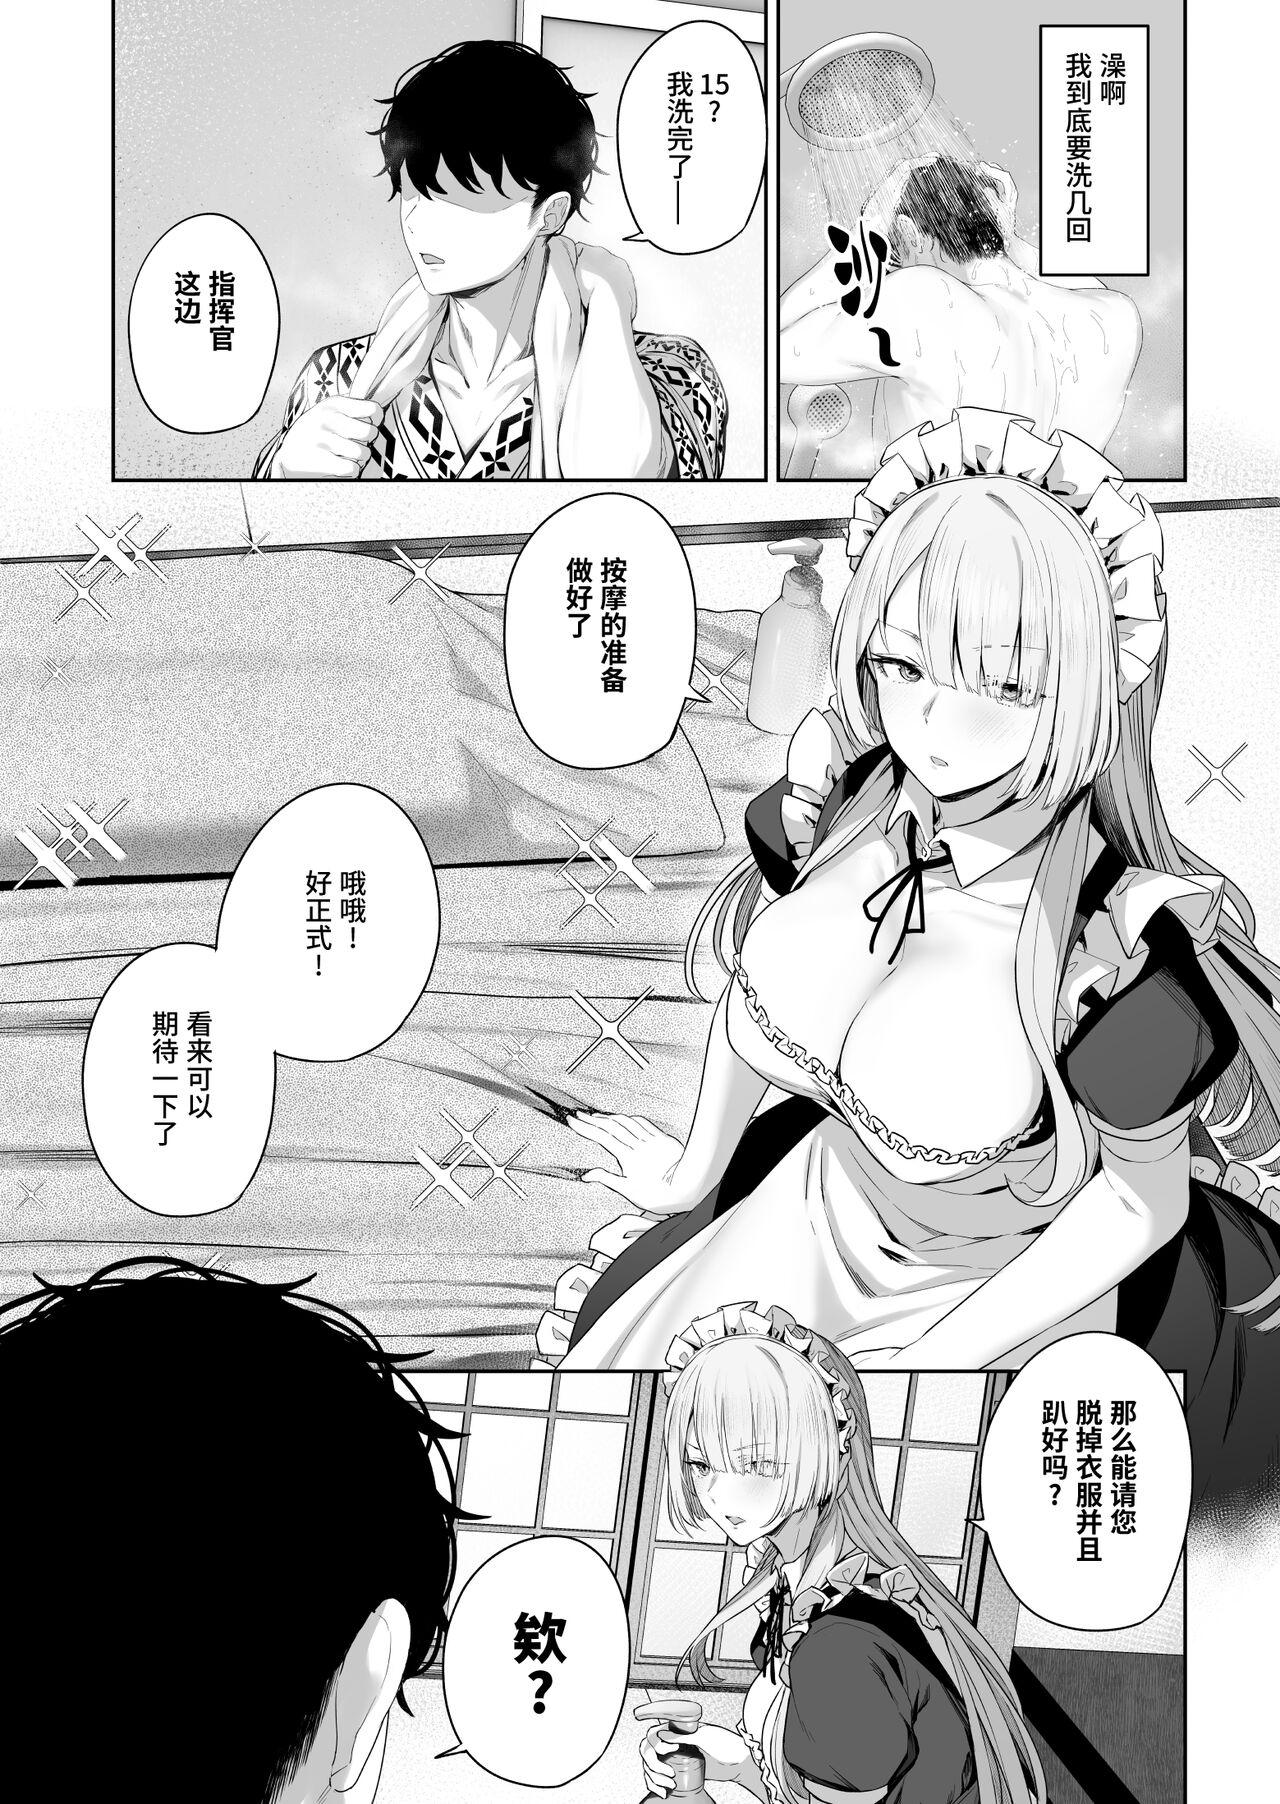 Pussylick AK15の進捗1 - Girls frontline Girl - Page 3